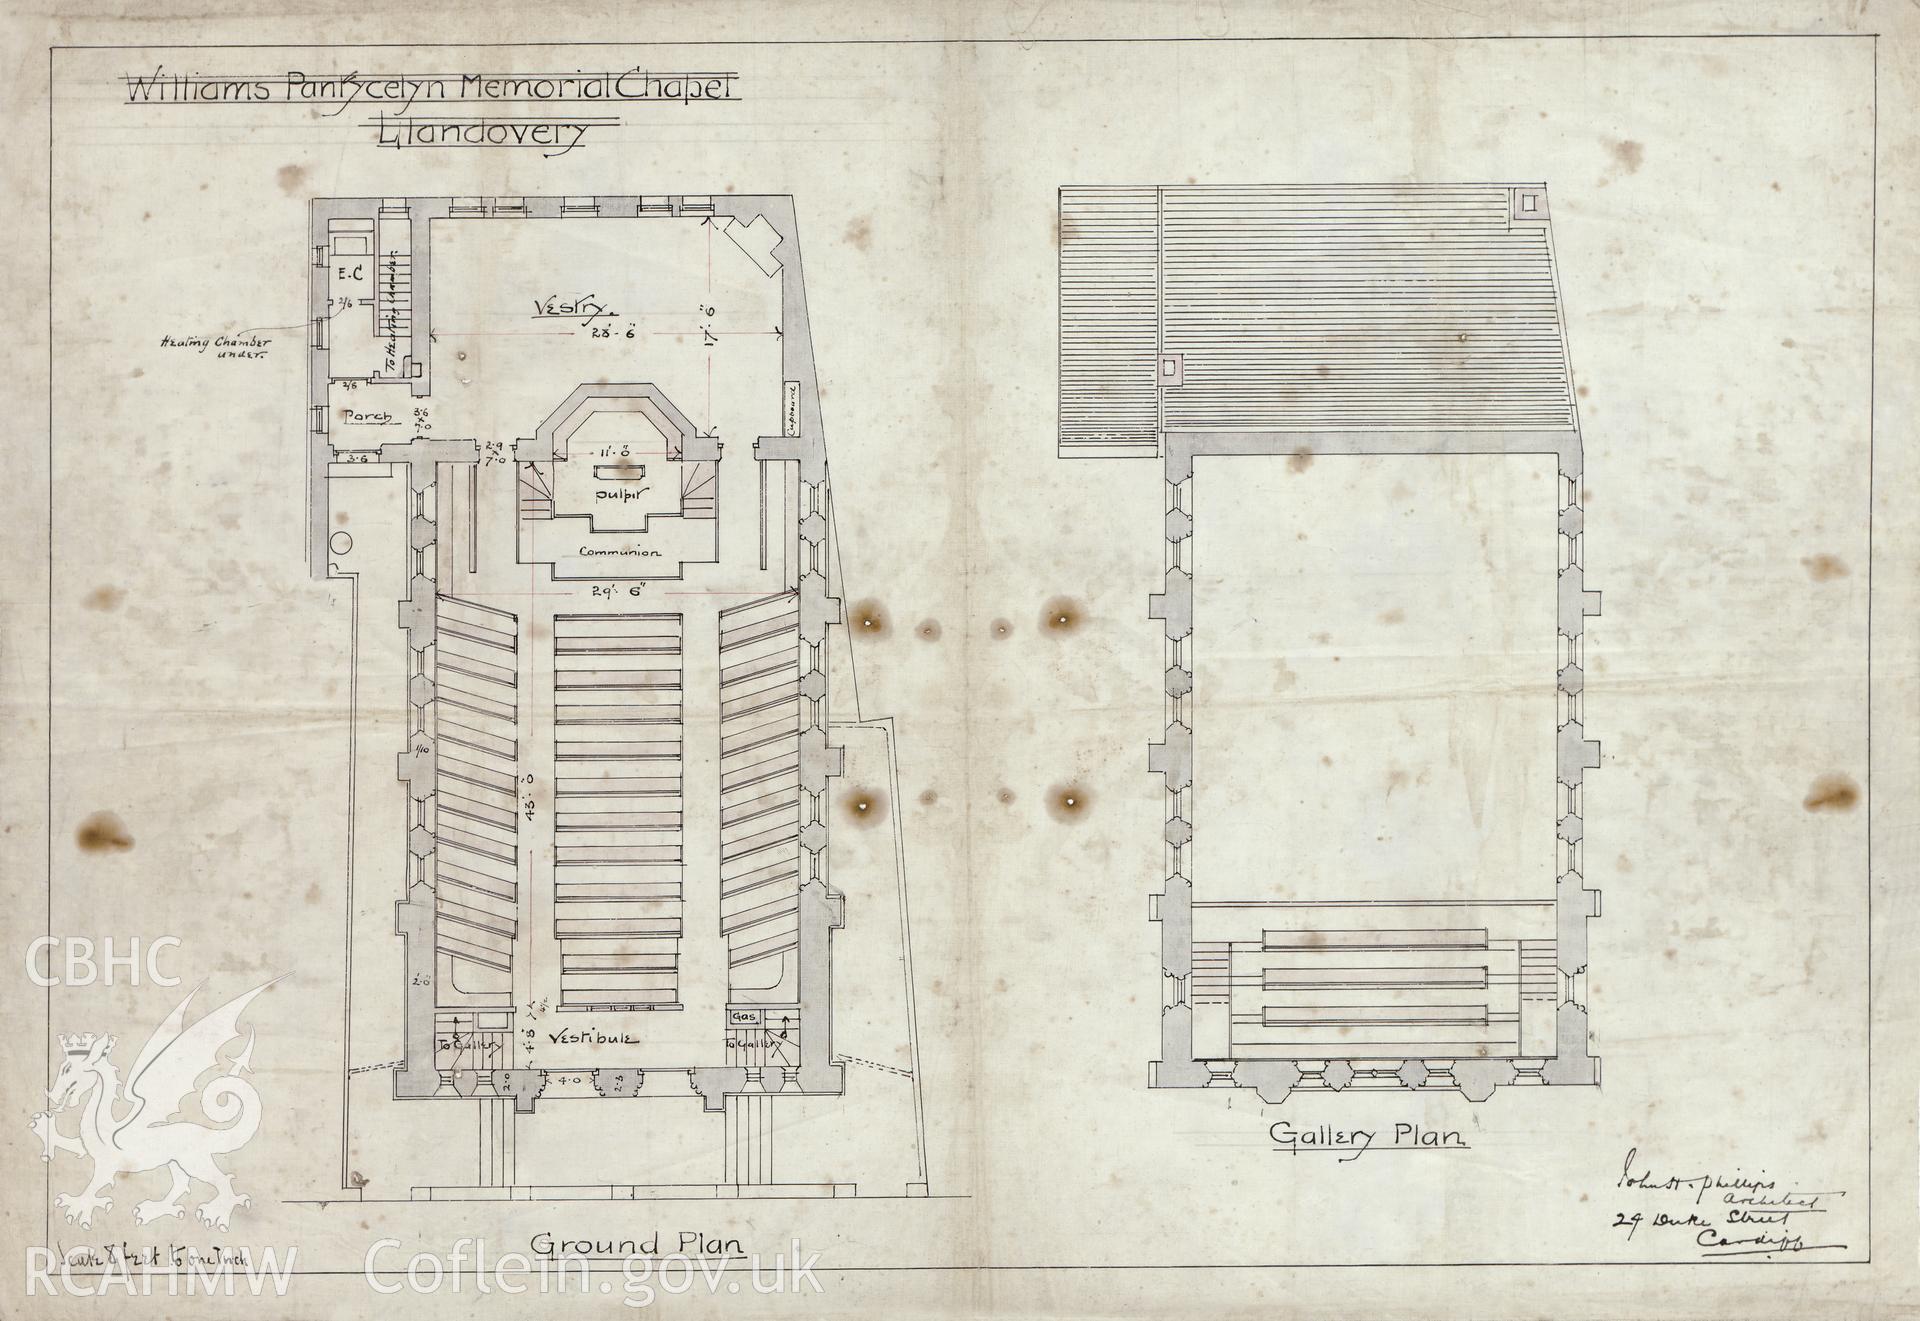 Measured ground floor and gallery plans of Williams Pantycelyn Chapel, dated 1886.